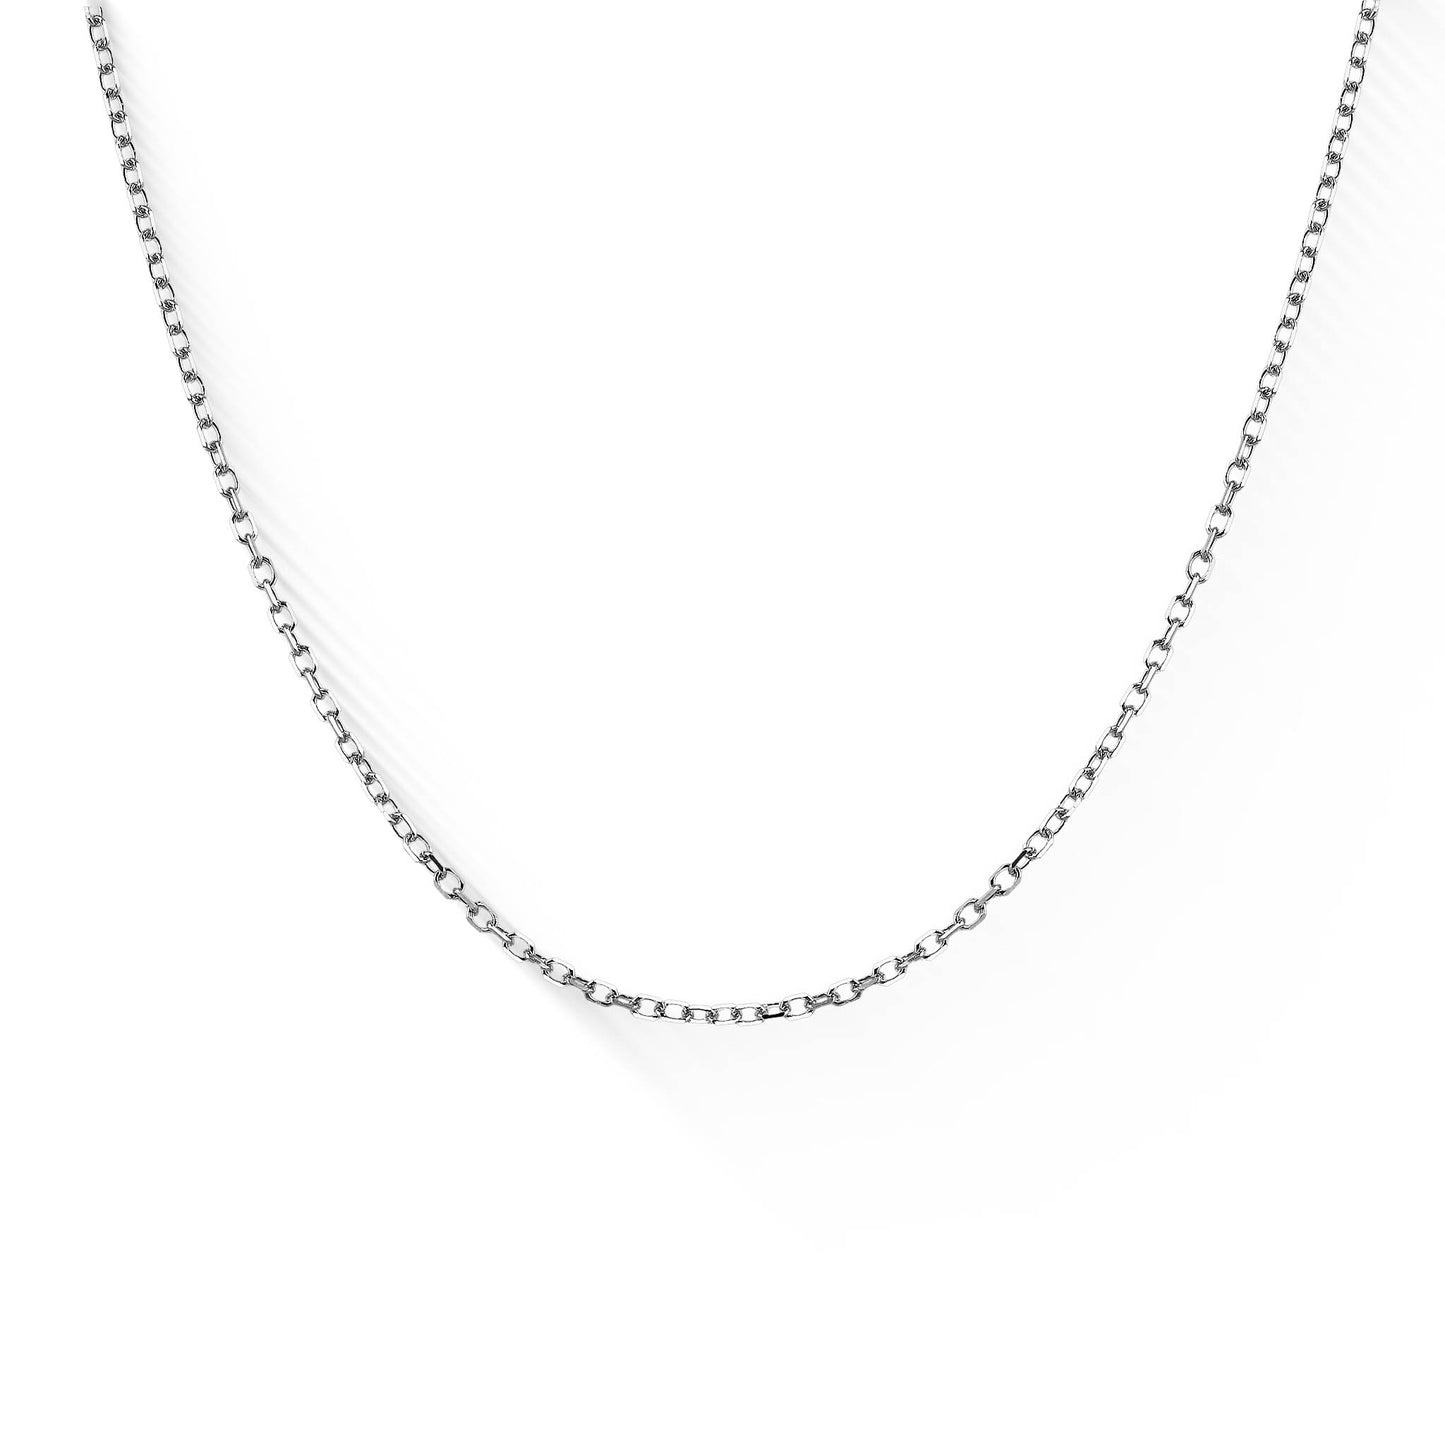 700568 - 14K White Gold - 18" Oval Cable Chain, 1.3mm